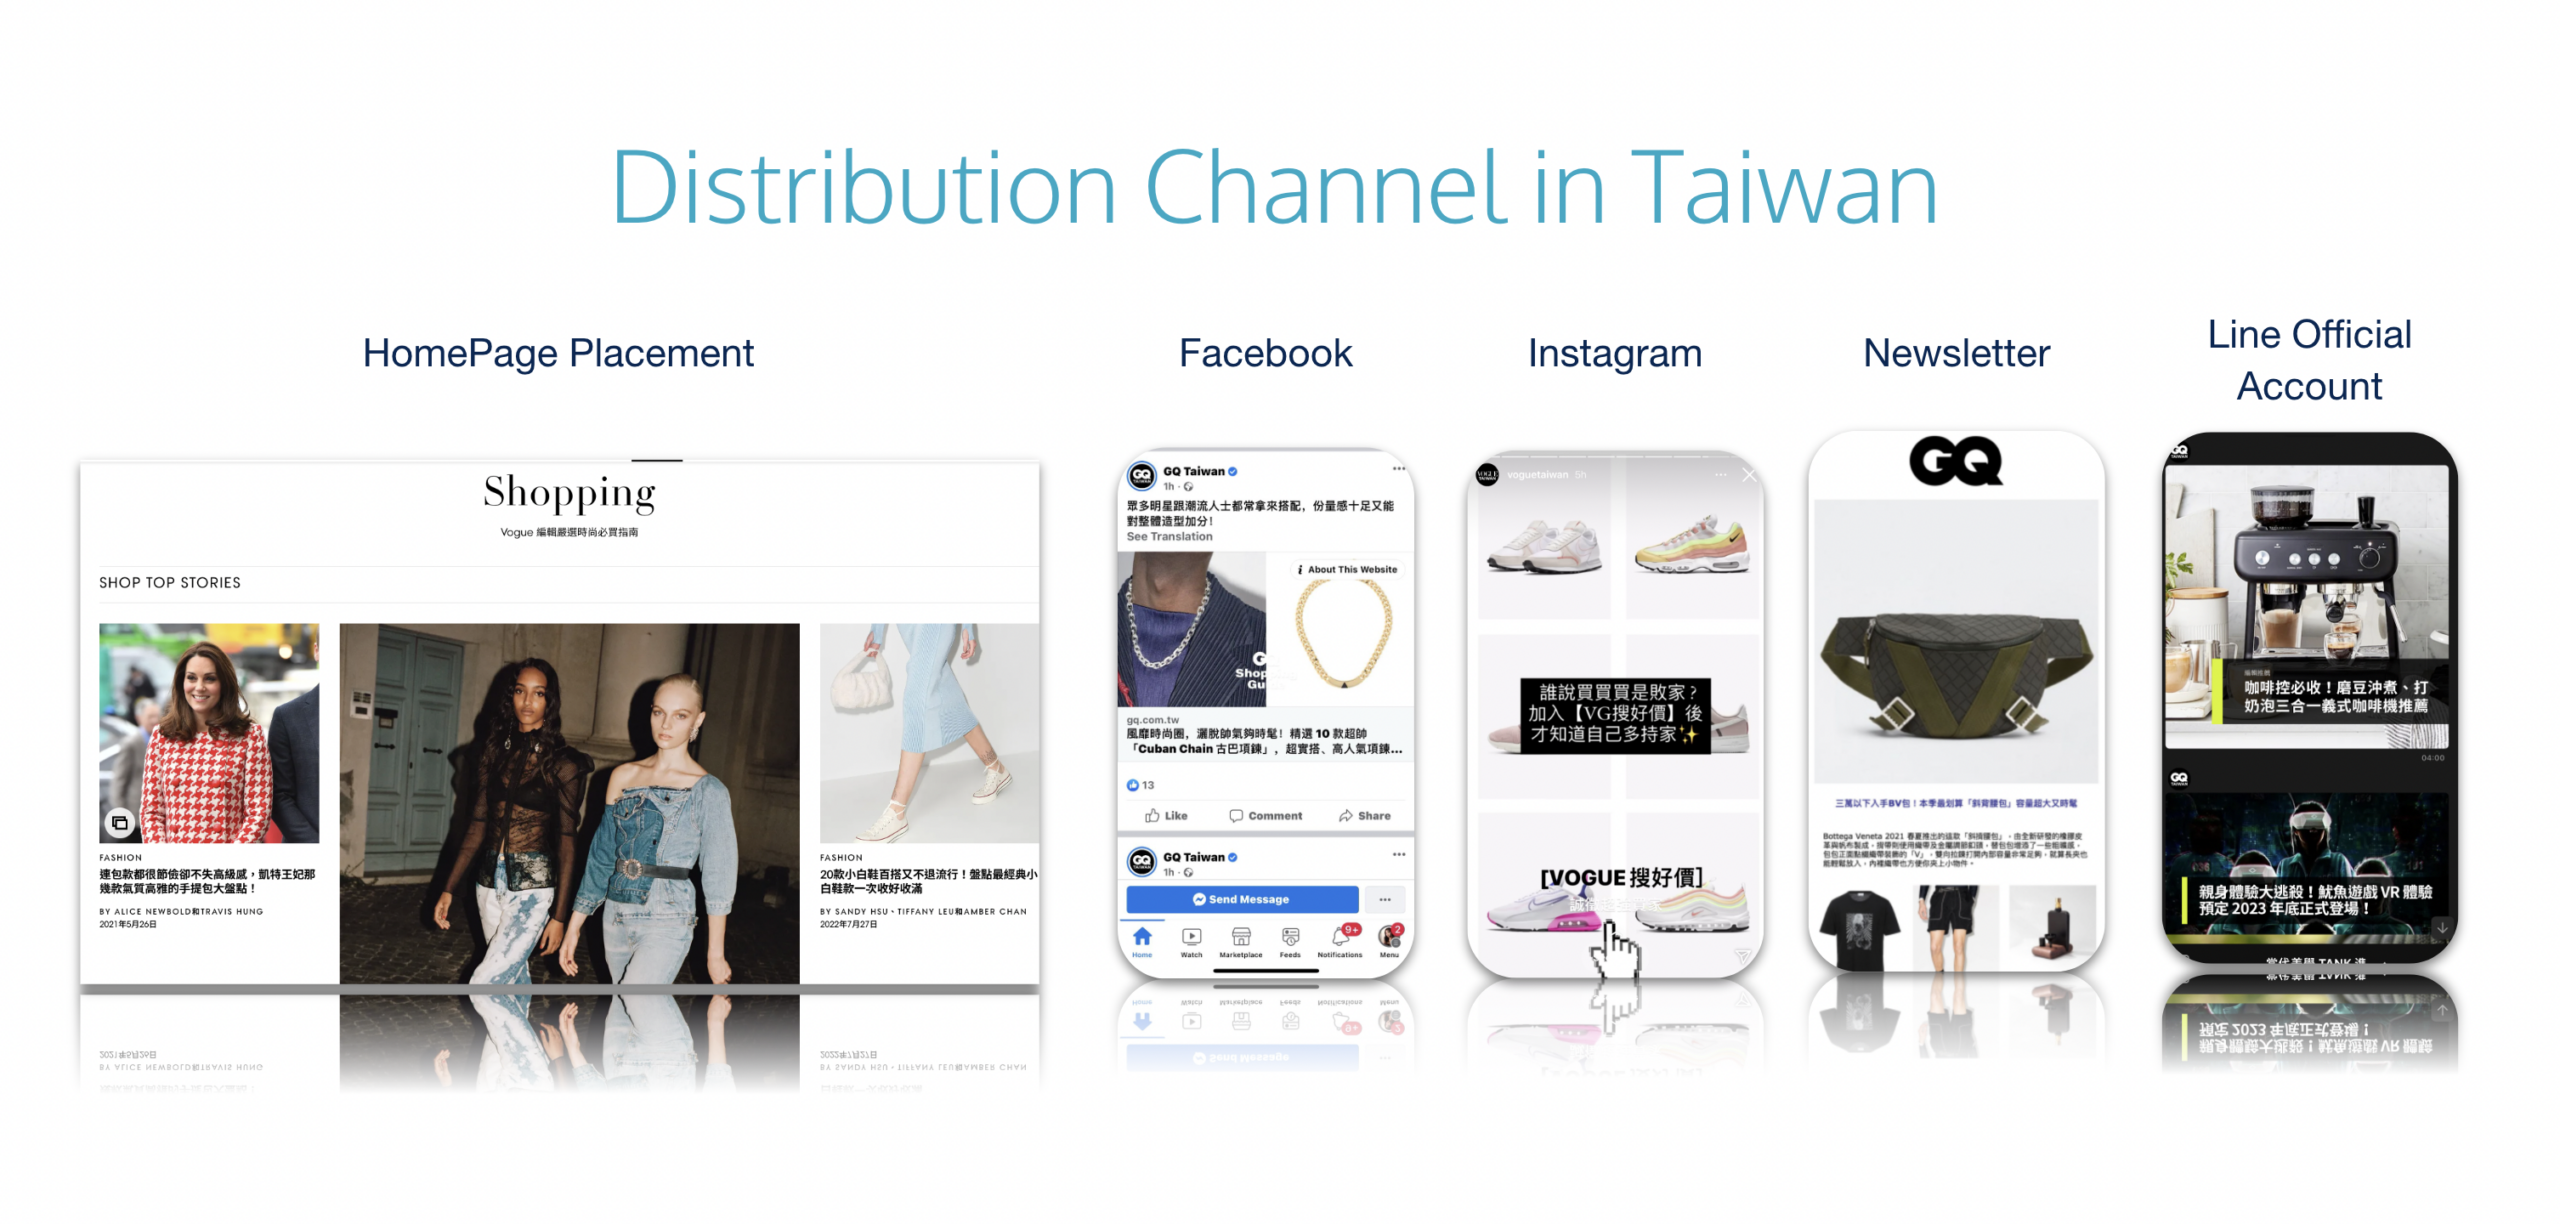 Distribution Channel in Taiwan